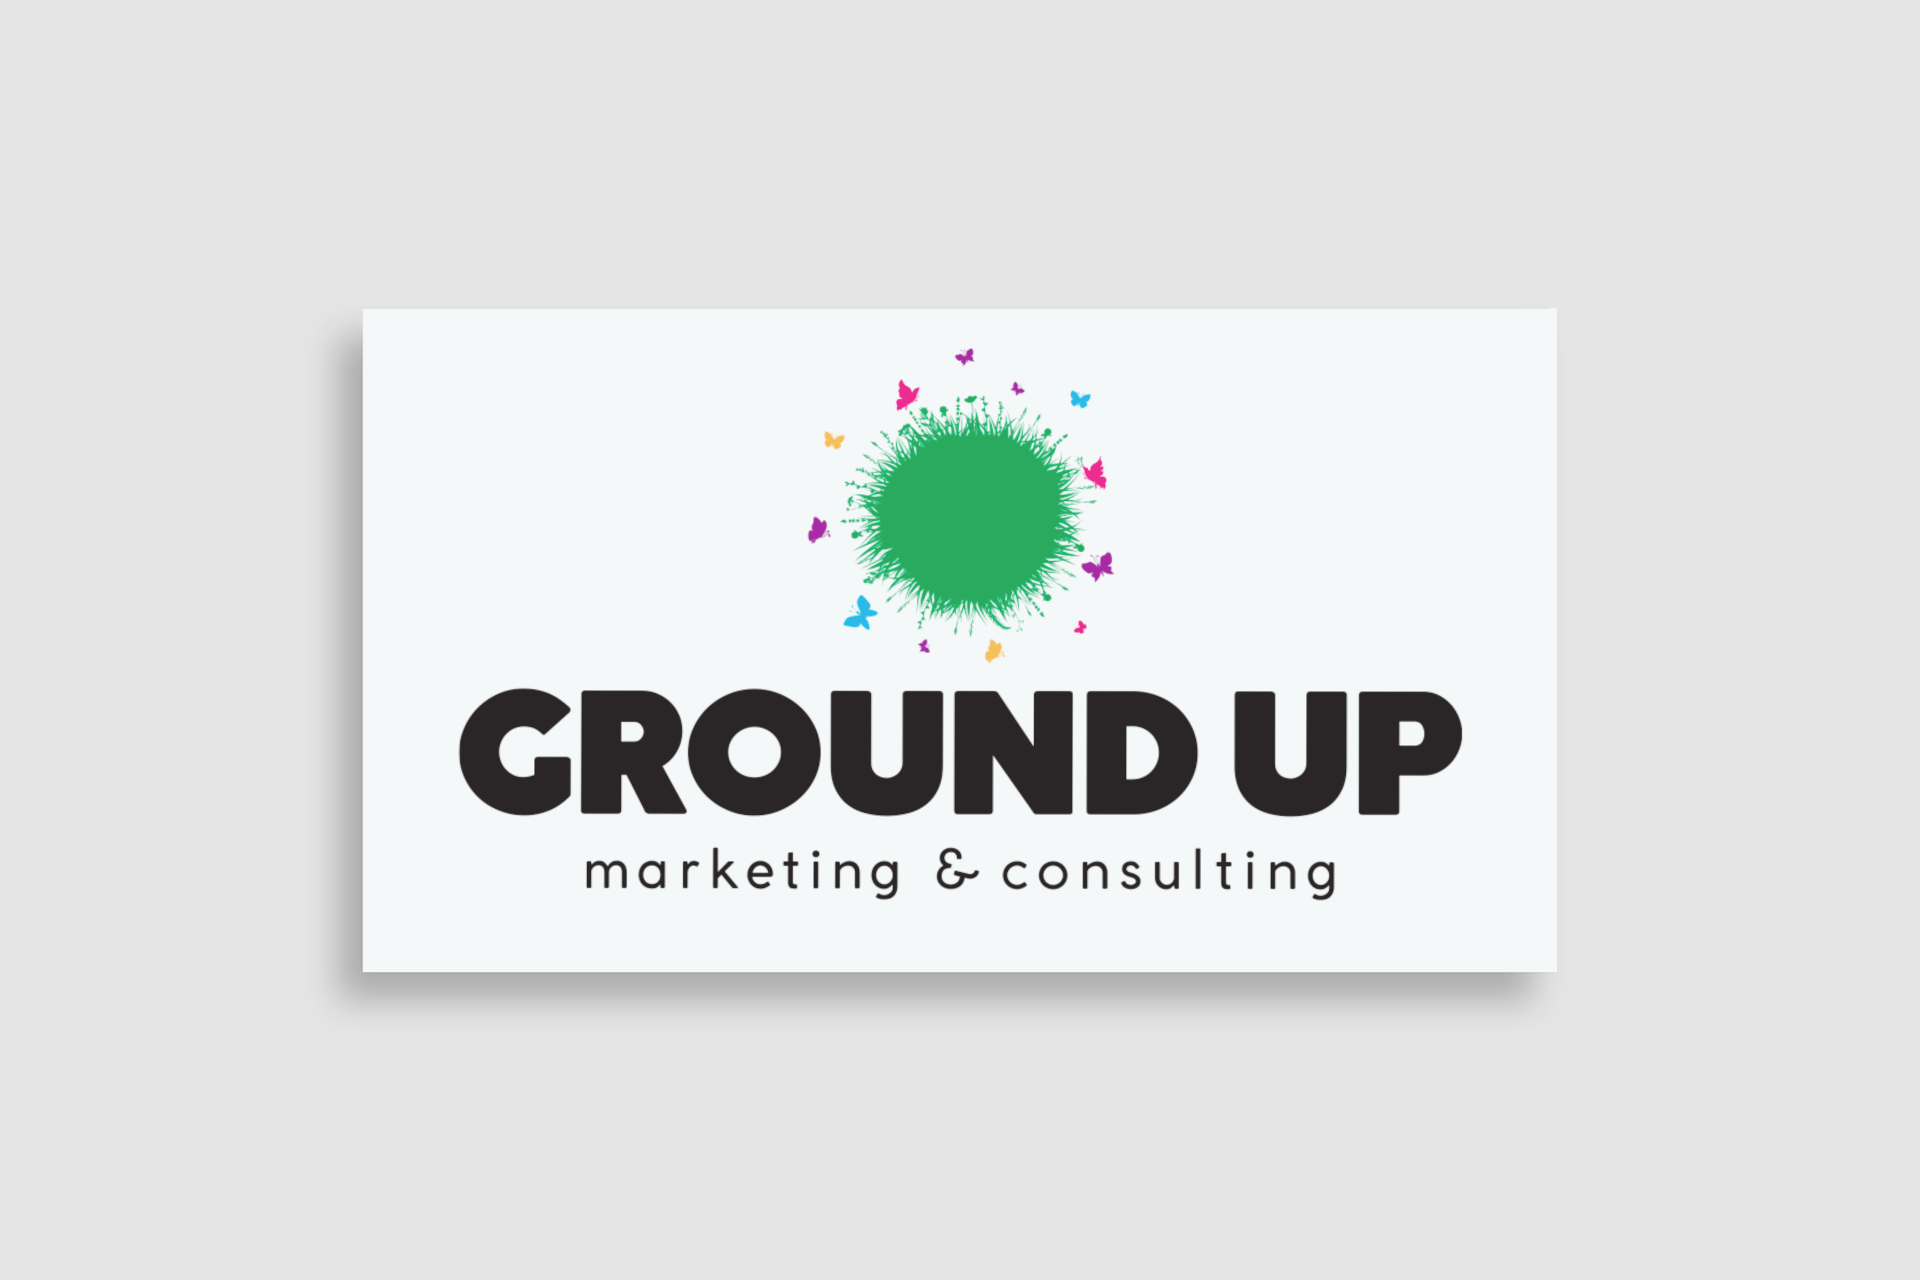 5-Ground Up logo.png